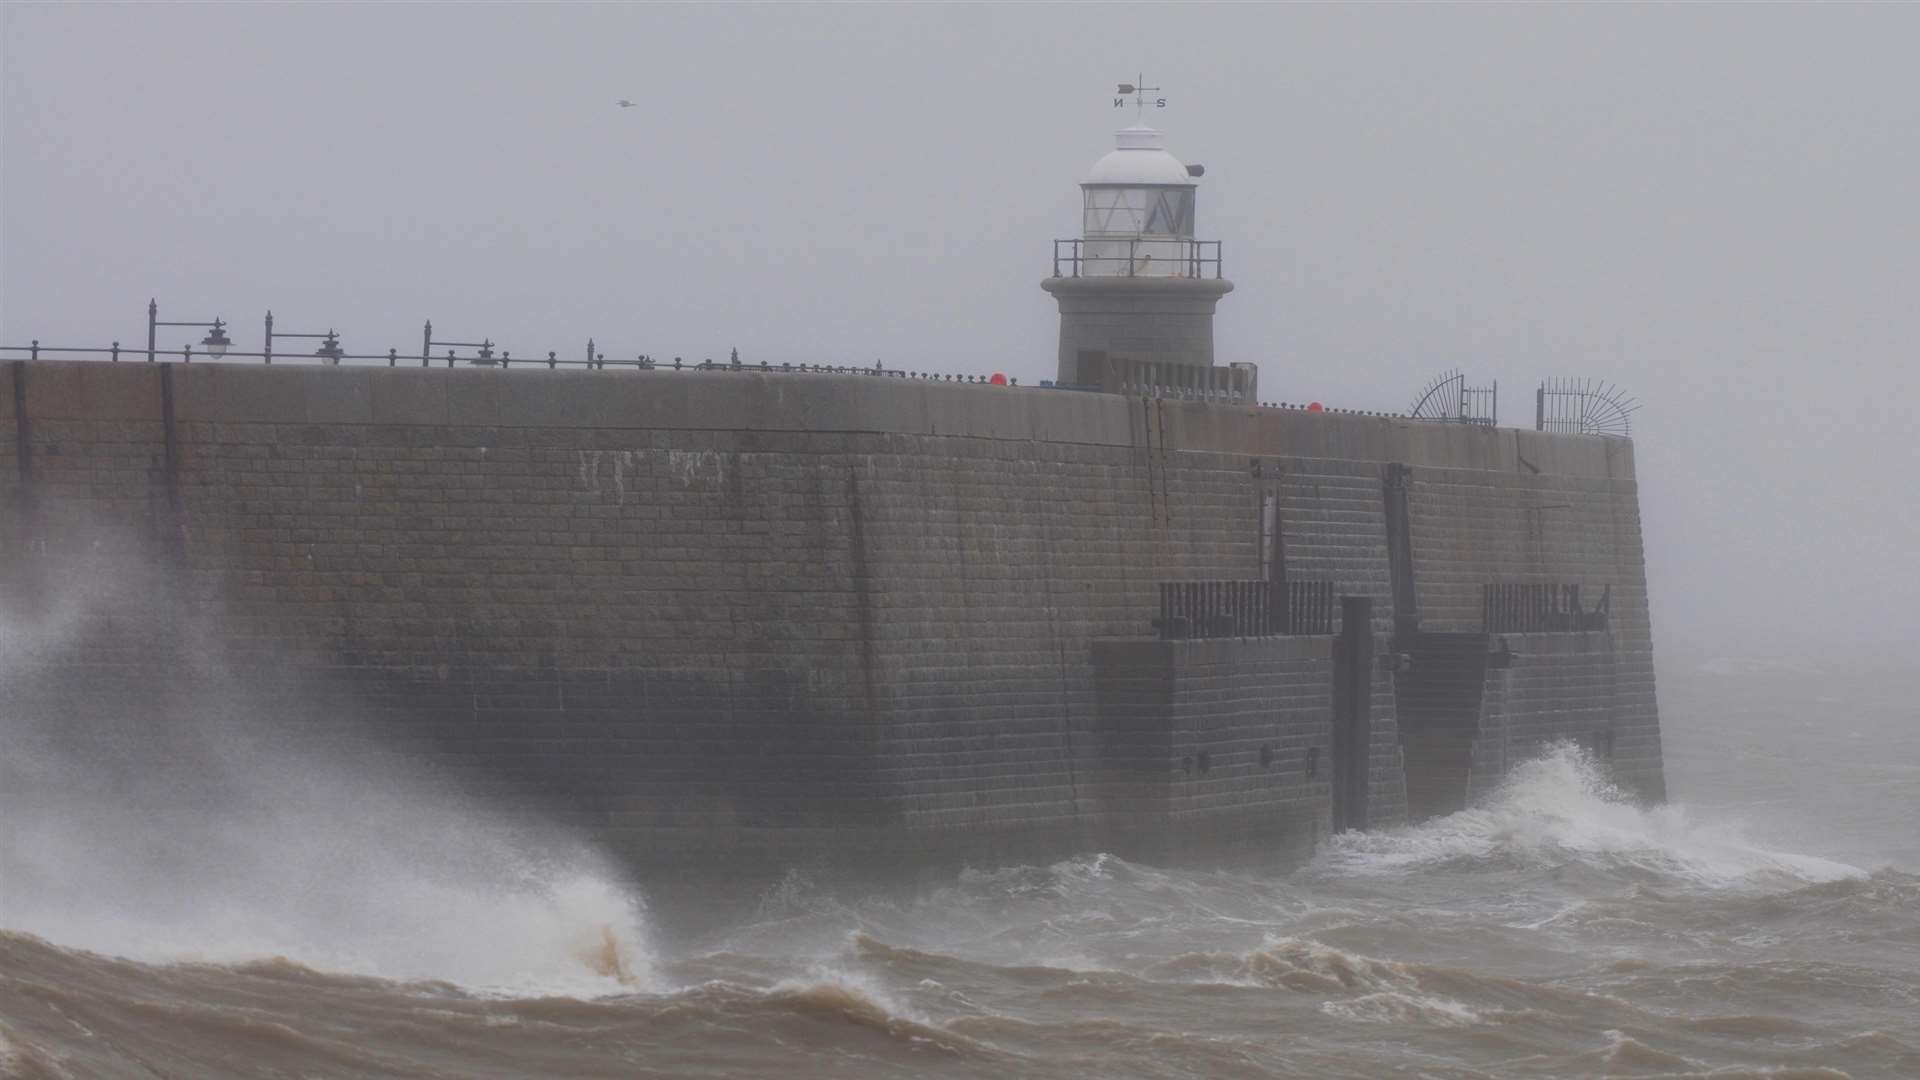 Strong winds and large waves at Folkestone harbour. Library image.